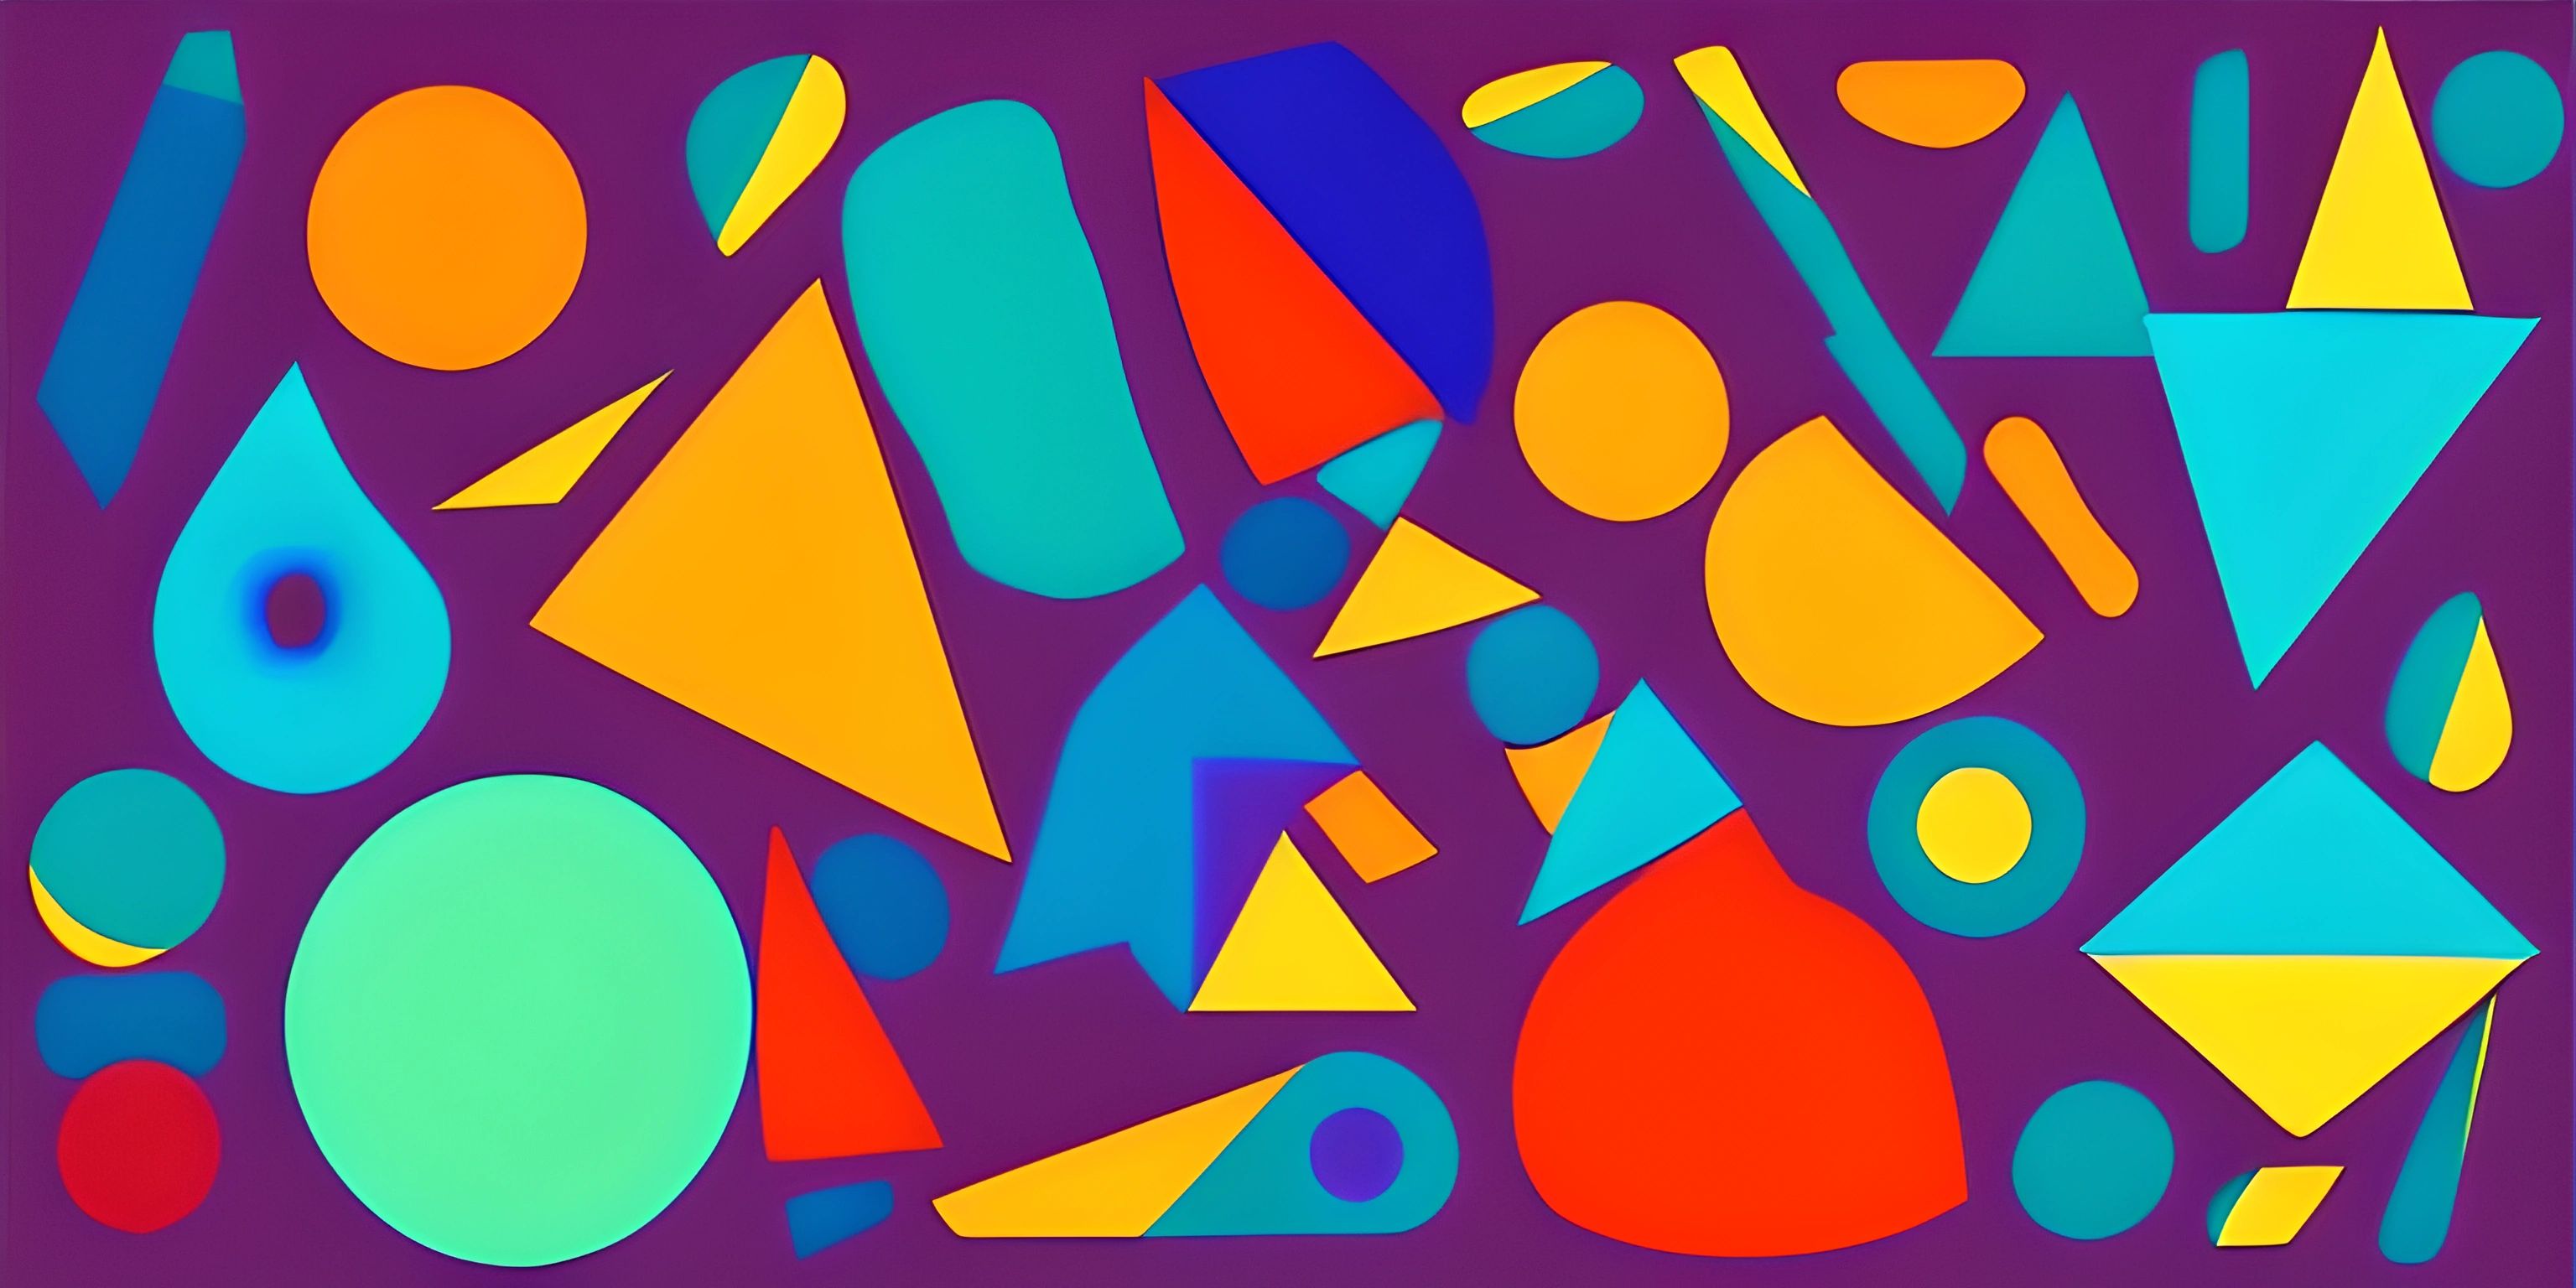 an abstract painting made with different shapes and lines in purple, blue, orange, and green